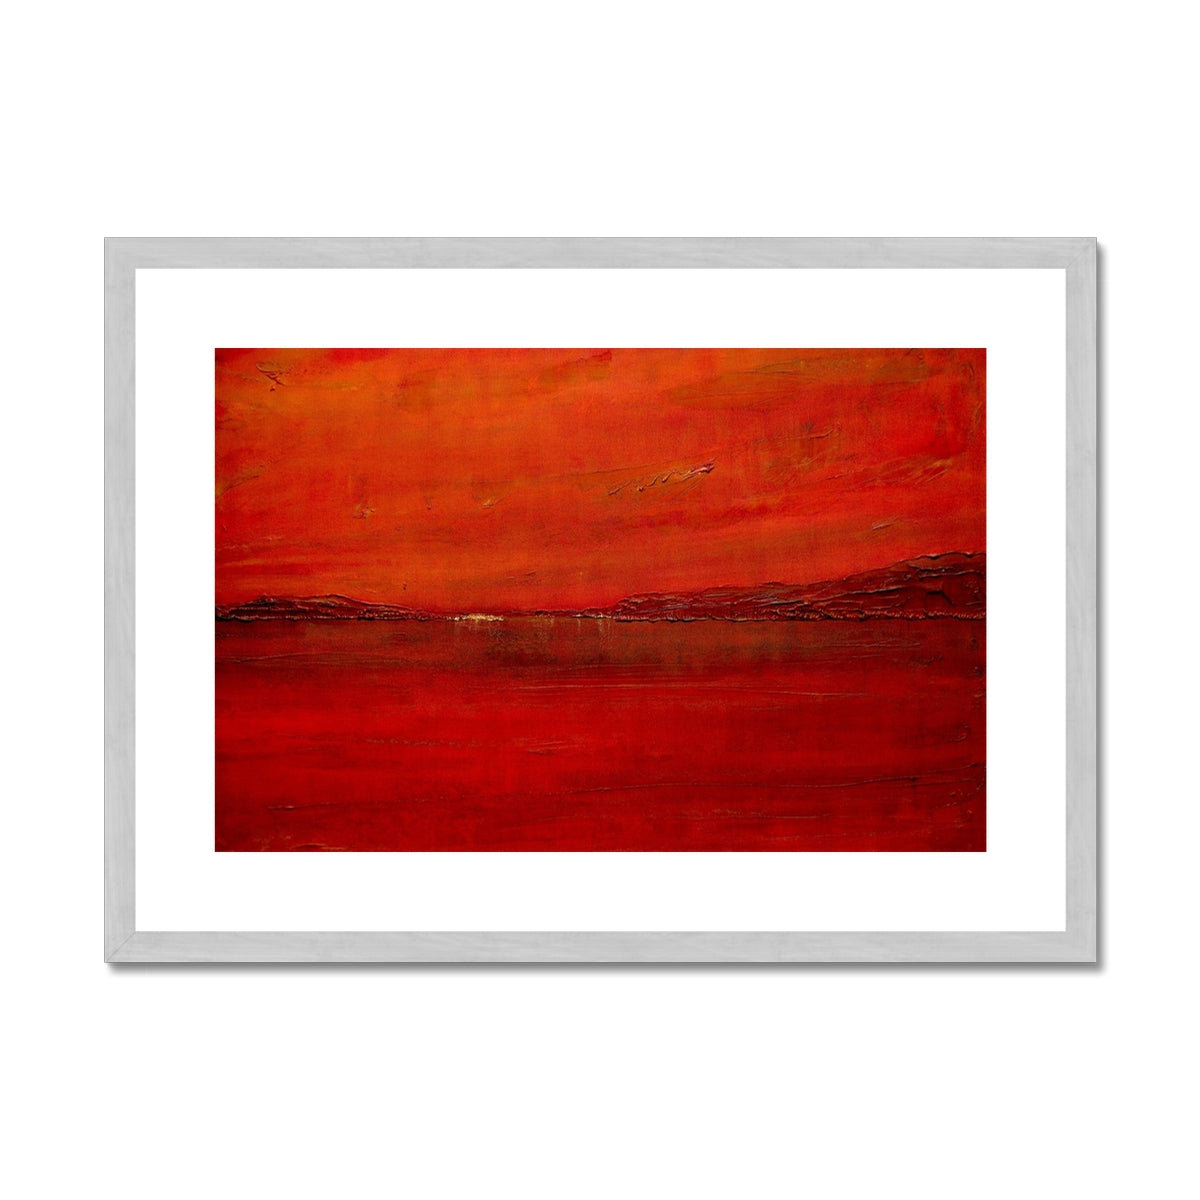 Deep Loch Lomond Sunset Painting | Antique Framed & Mounted Prints From Scotland-Antique Framed & Mounted Prints-Scottish Lochs & Mountains Art Gallery-A2 Landscape-Silver Frame-Paintings, Prints, Homeware, Art Gifts From Scotland By Scottish Artist Kevin Hunter